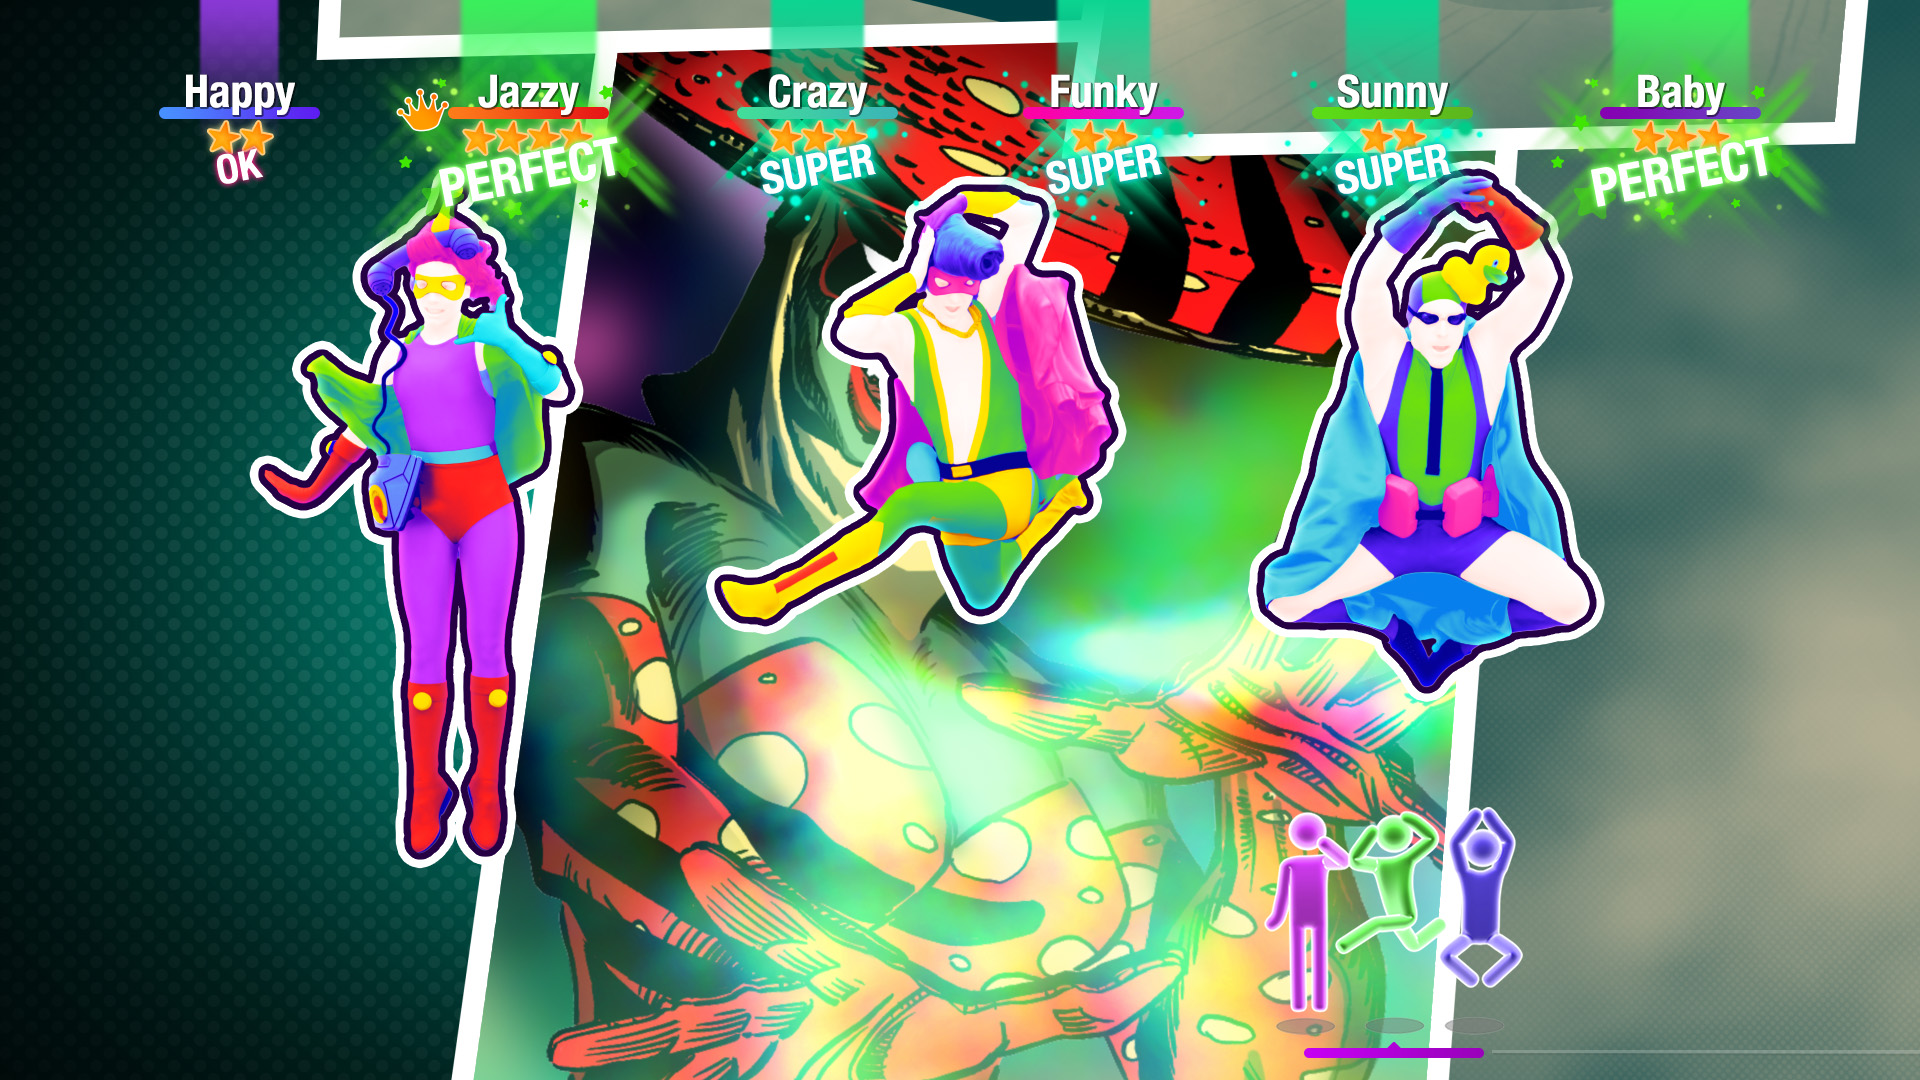 unlimited just dance 2021